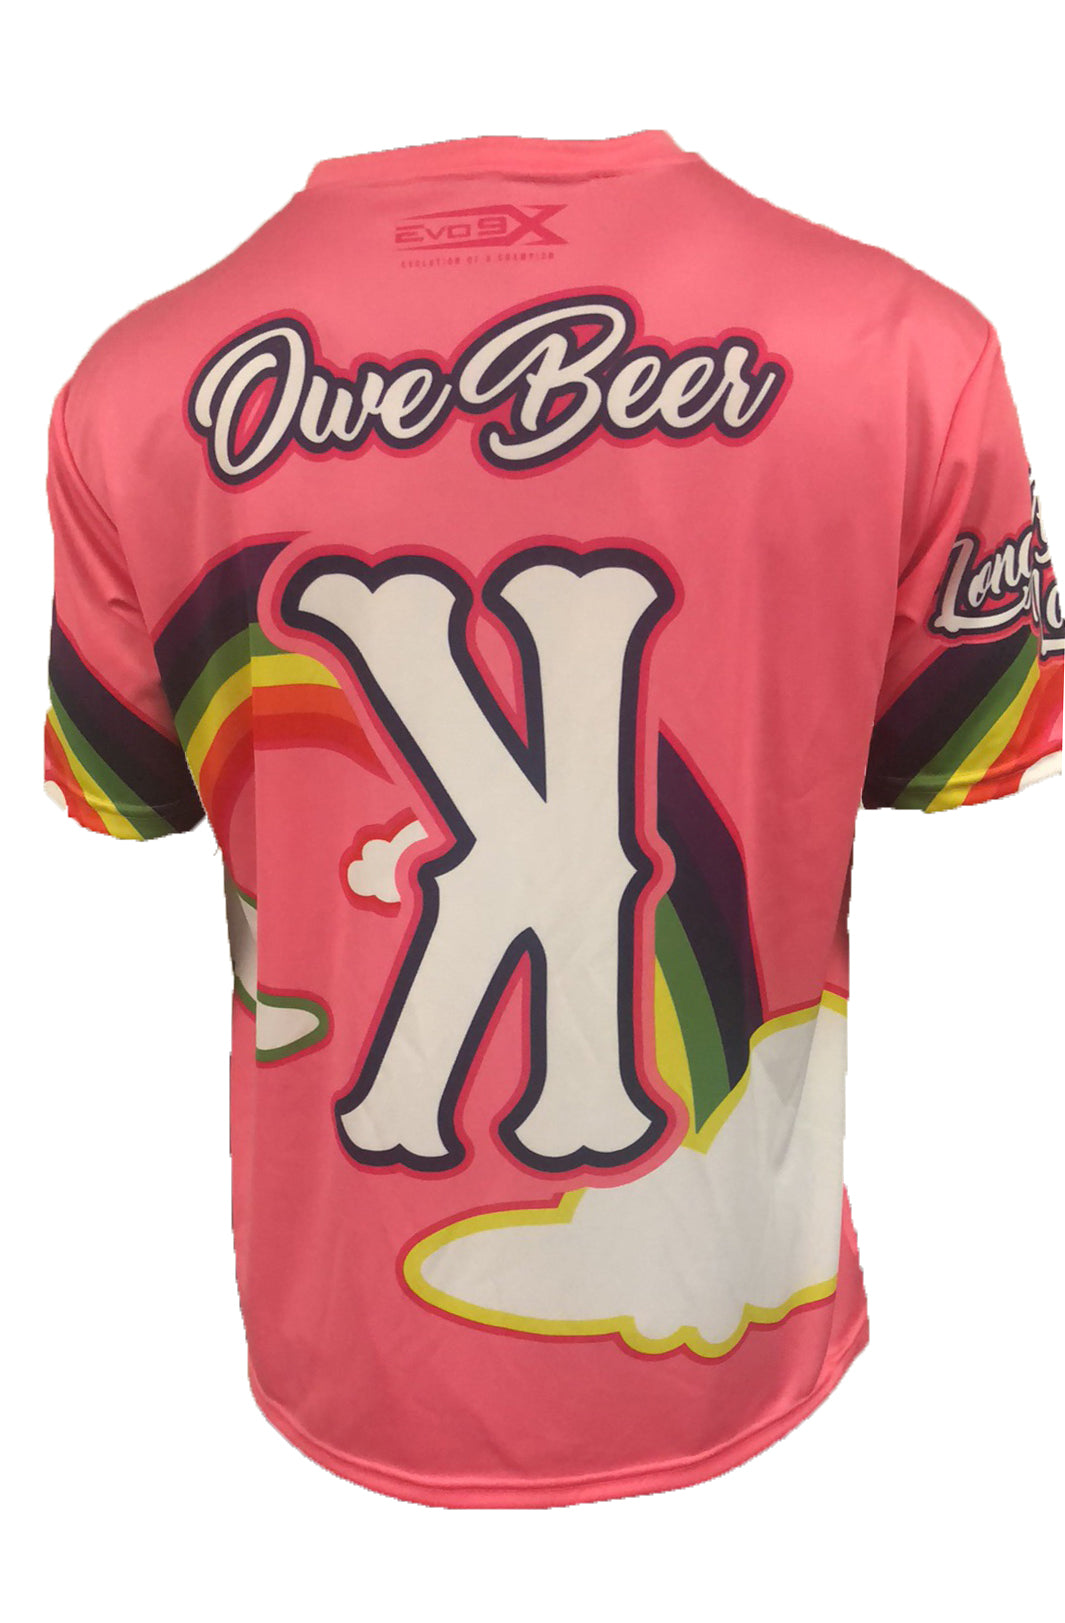 EVO9X Store EVO9X Full Sublimated Breast Cancer Awareness Jersey Fight Like A Girl XLarge